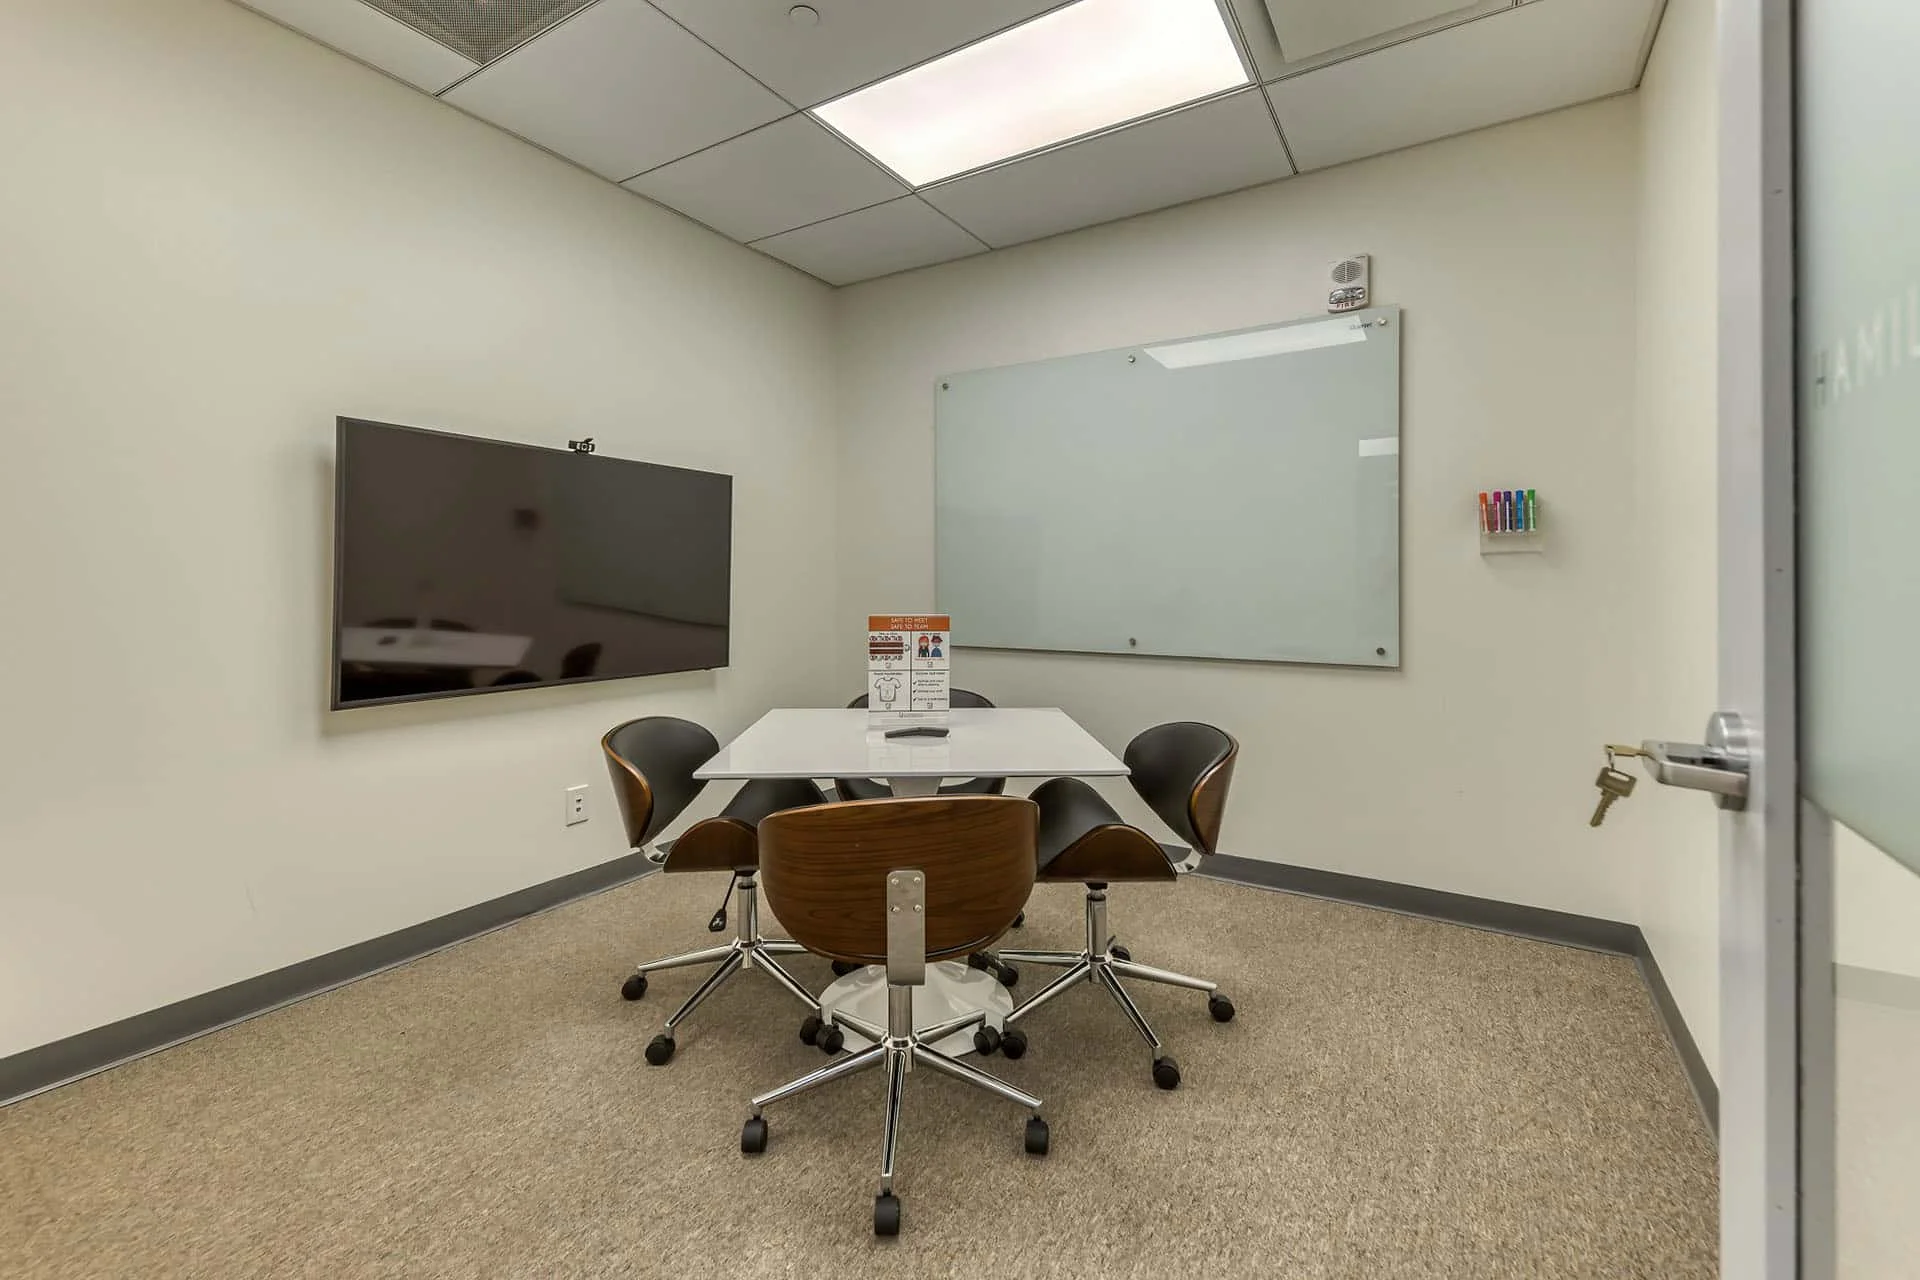 Technology-Integrated Meeting Room Rental for Efficient Collaboration. So, wait no more, and browse the options featured our website.